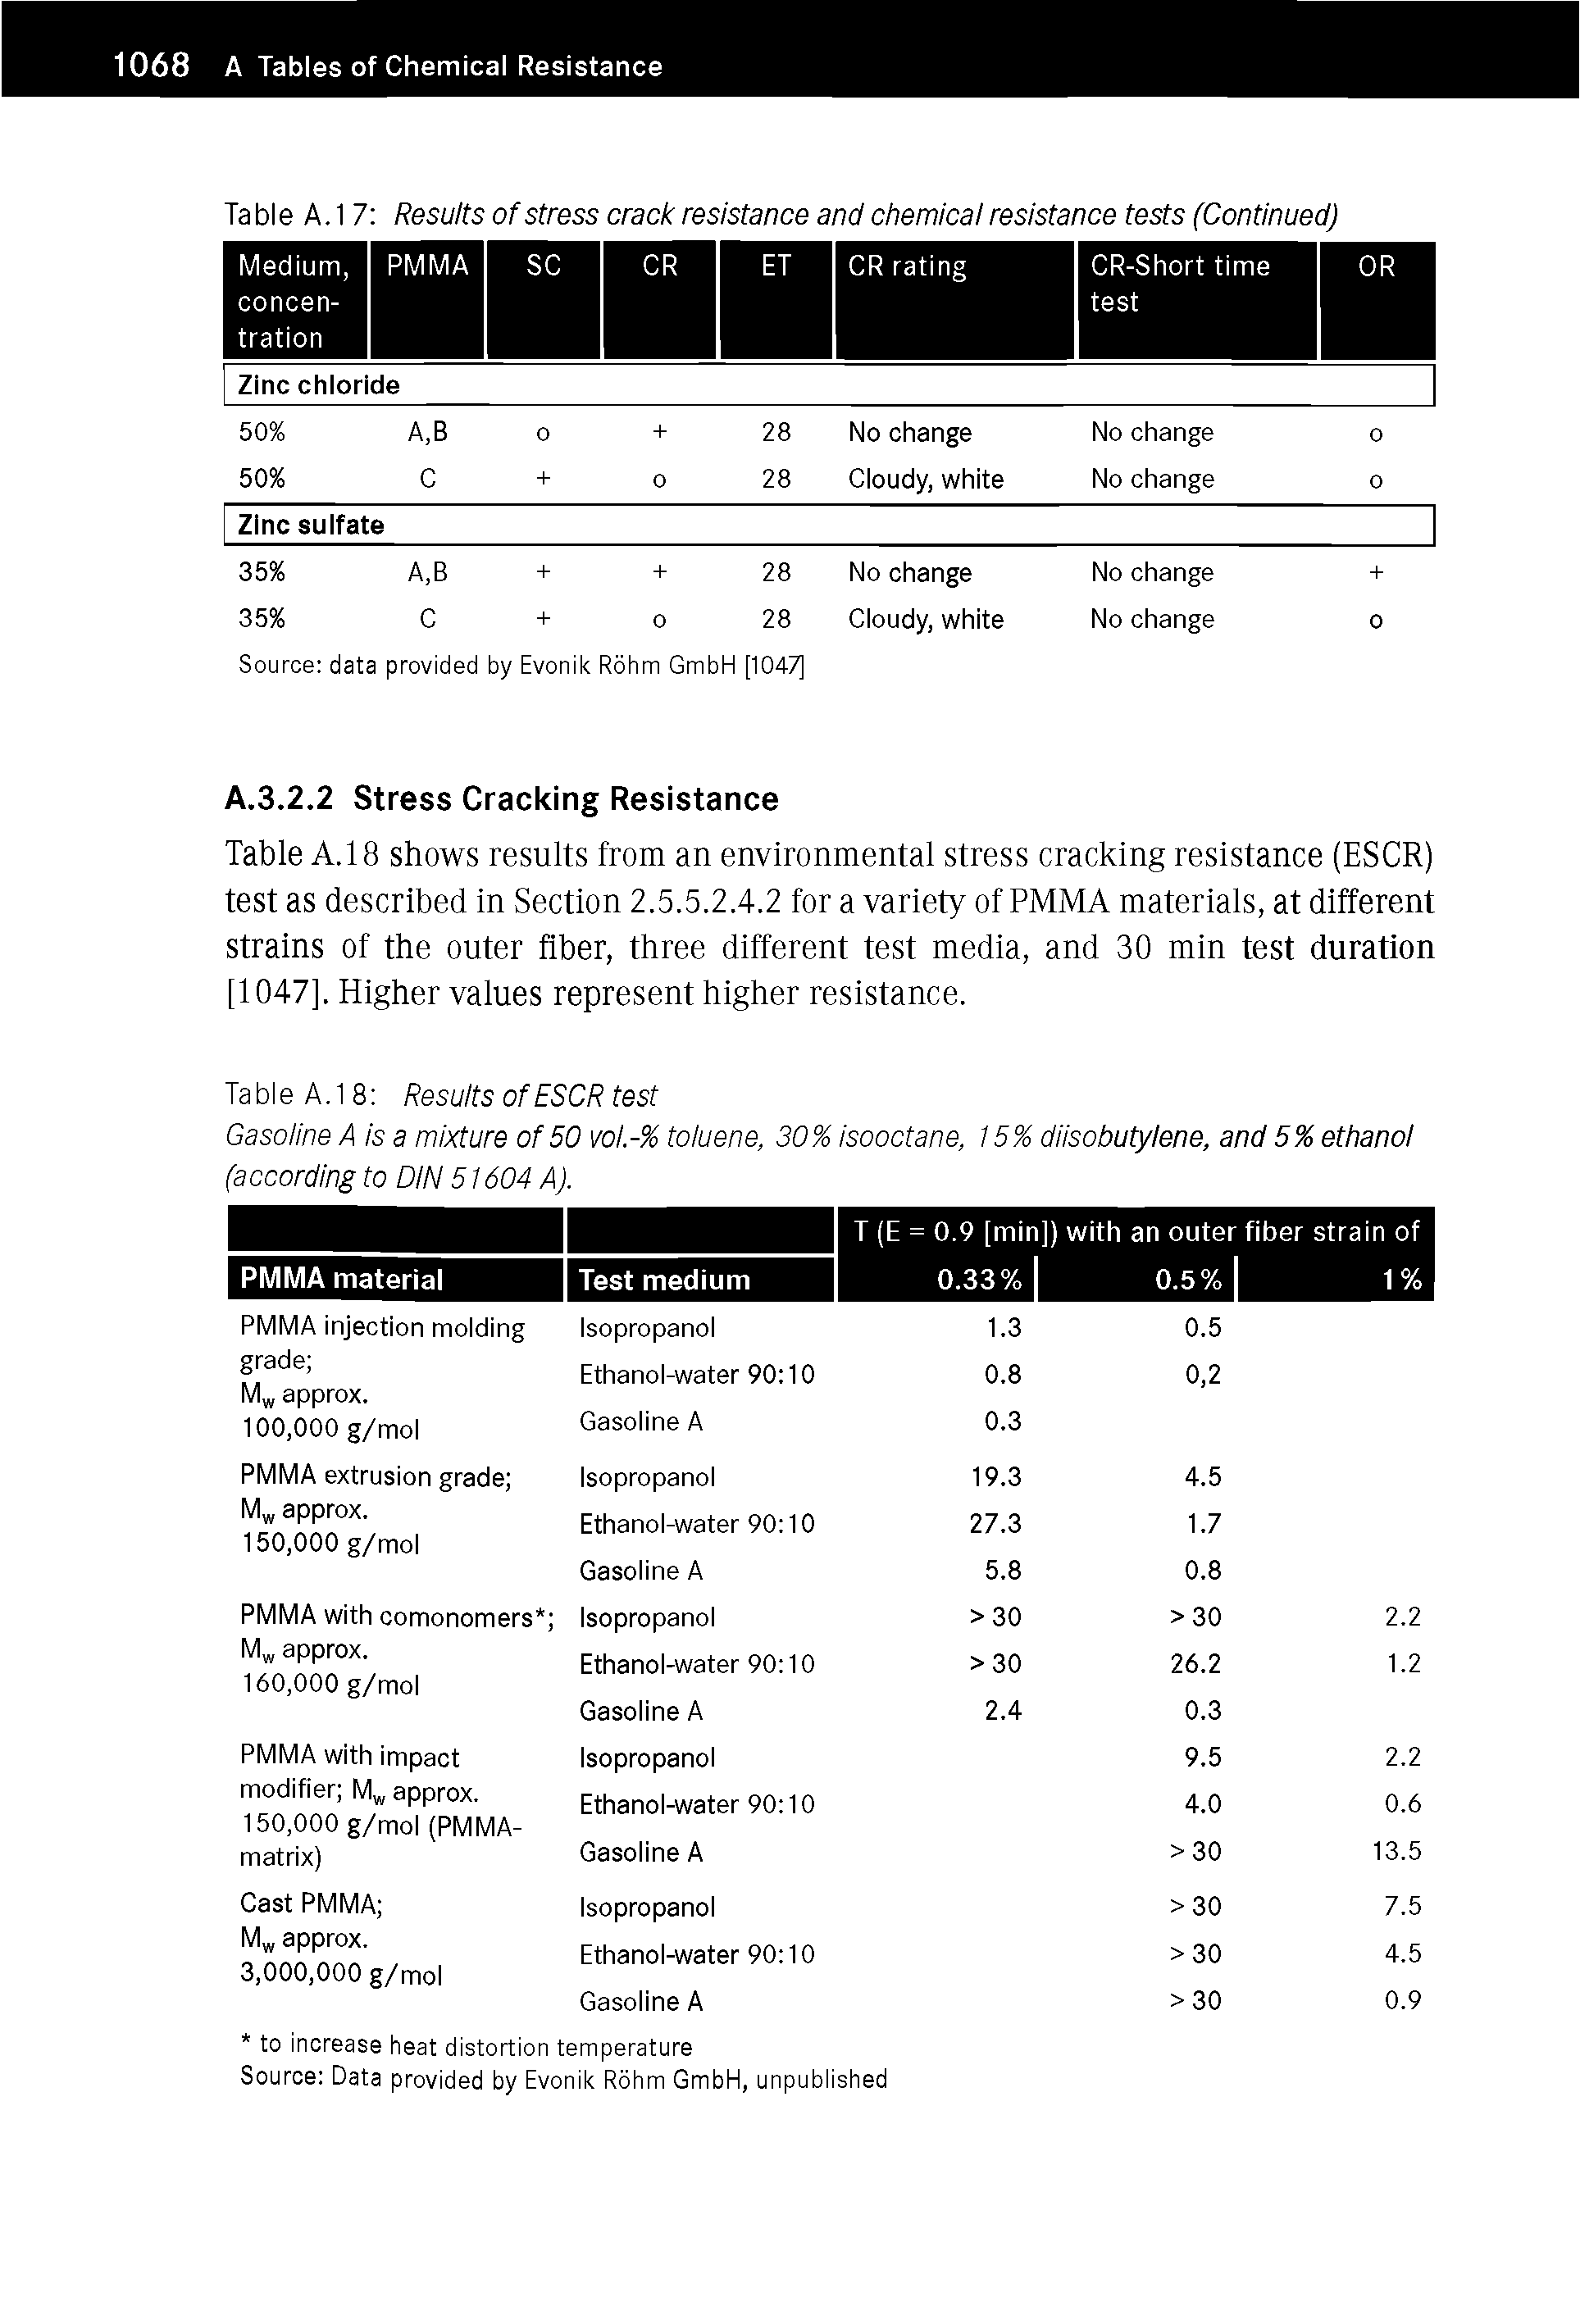 Table A. 18 shows results from an environmental stress cracking resistance (ESCR) test as described in Section 2.5.5.2.4.2 for a variety of PMMA materials, at different strains of the outer fiber, three different test media, and 30 min test duration [1047]. Higher values represent higher resistance.